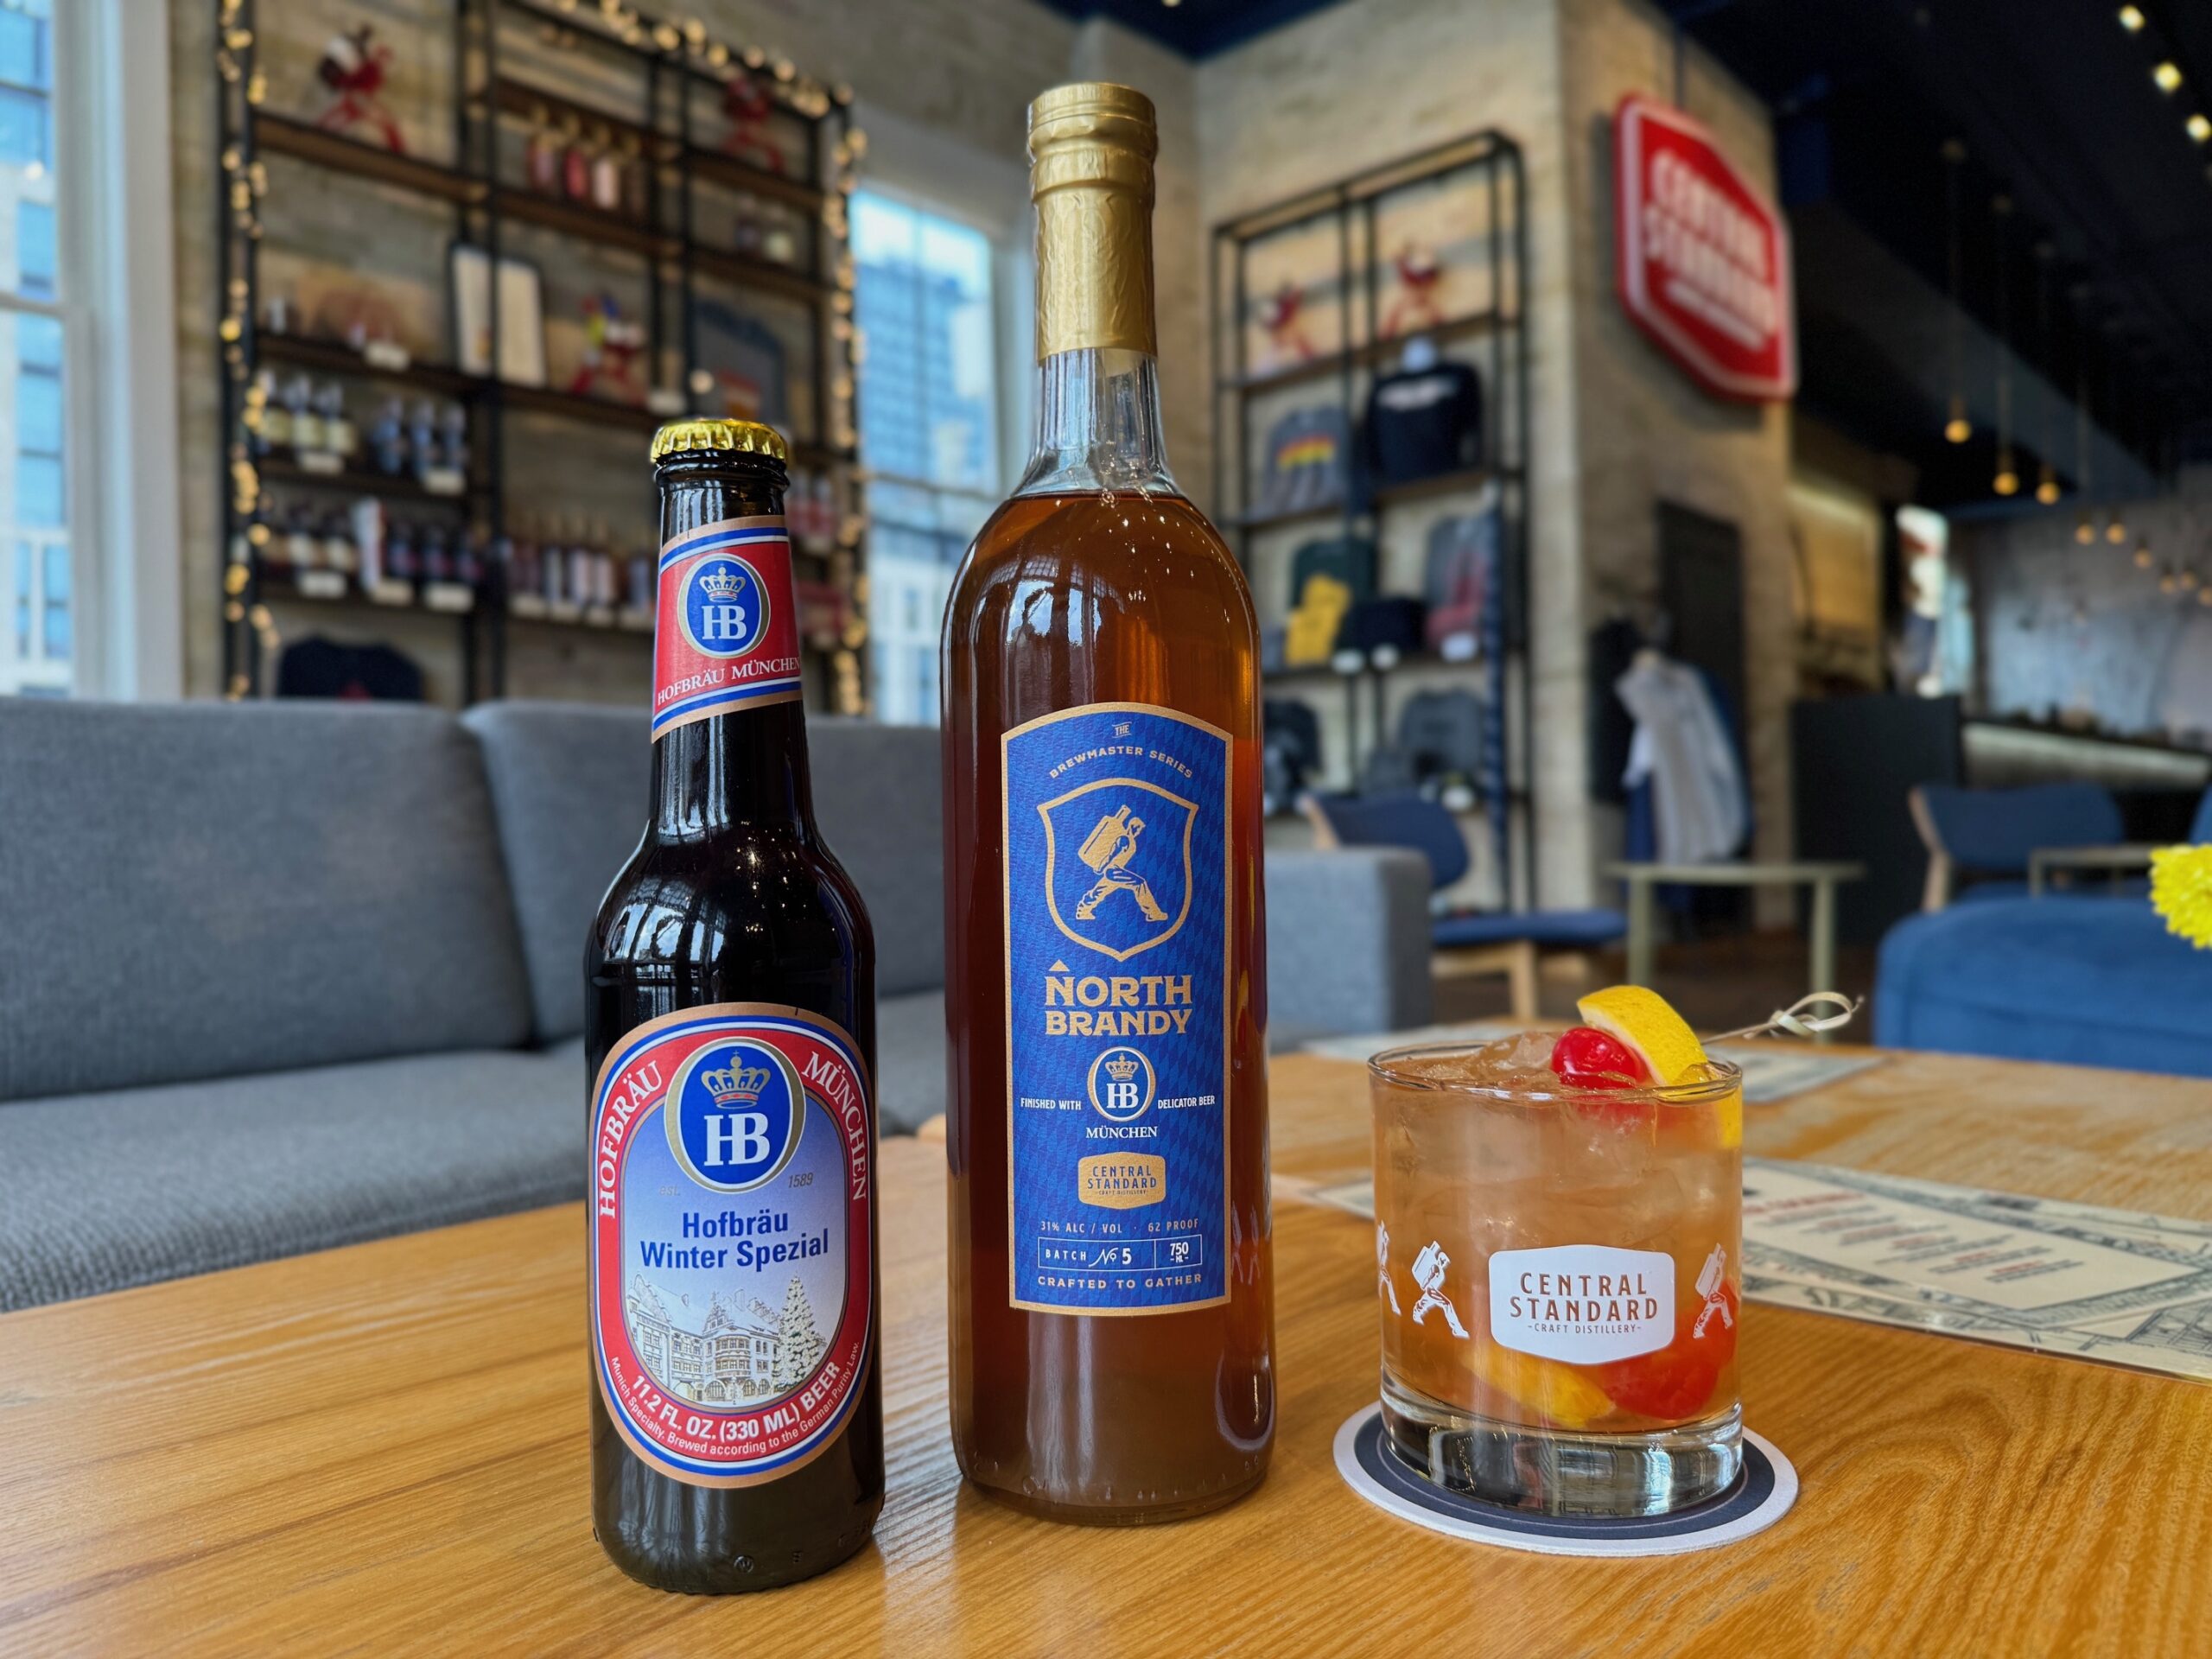 CENTRAL STANDARD RENEWS FIRST GLOBAL COLLABORATION IN ITS BREWMASTERS BRANDY SERIES